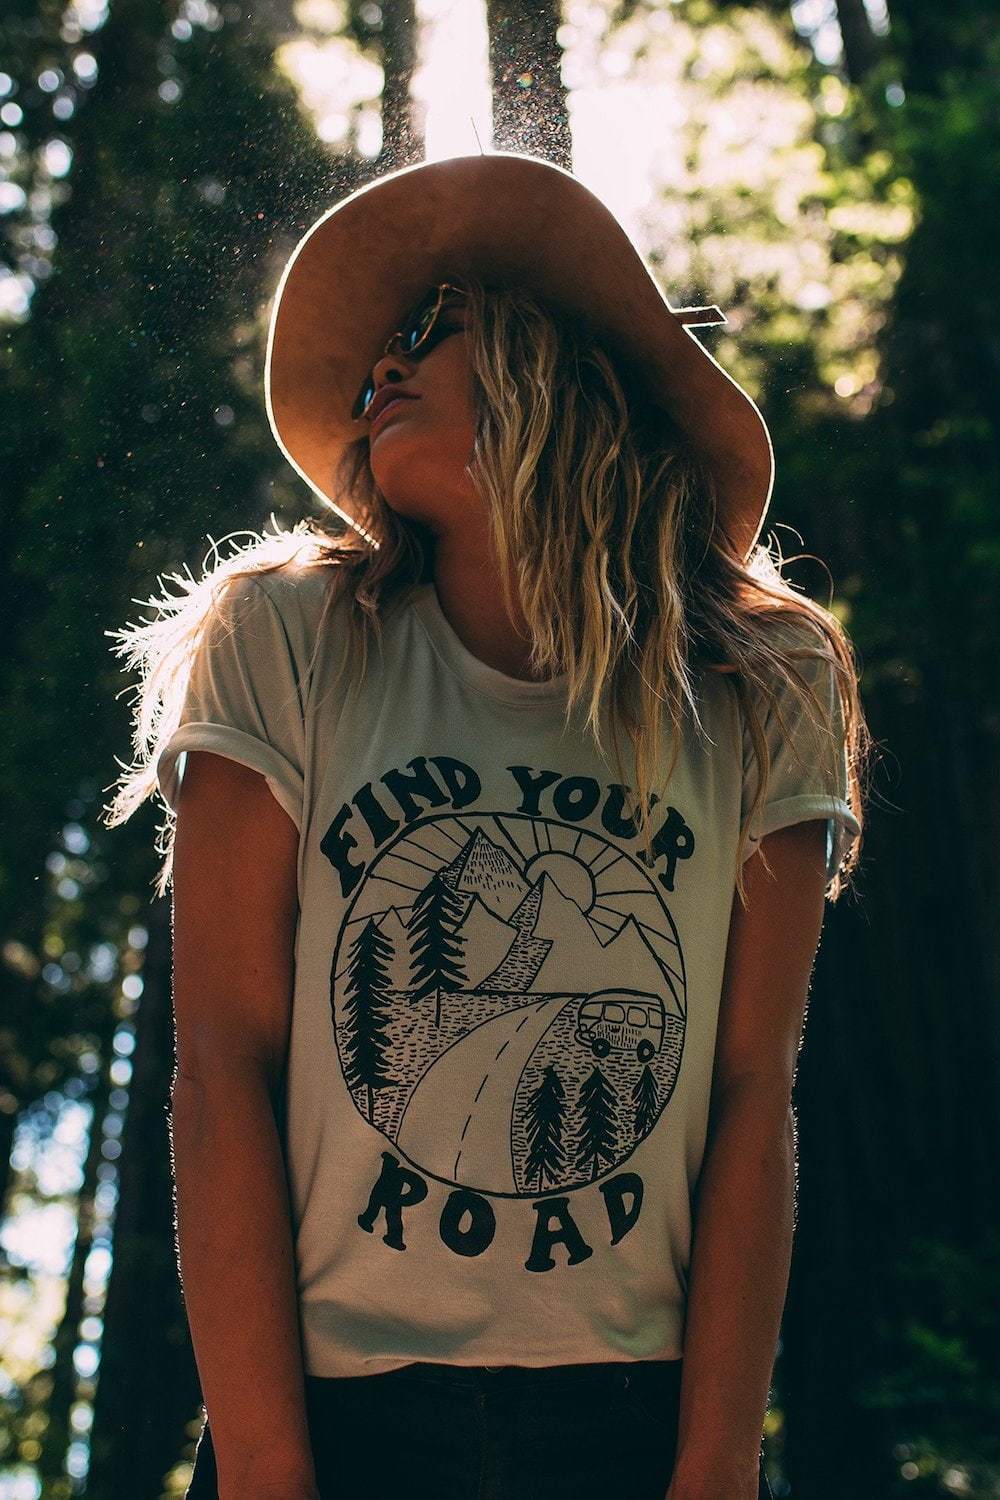 Find Your Road T-Shirt